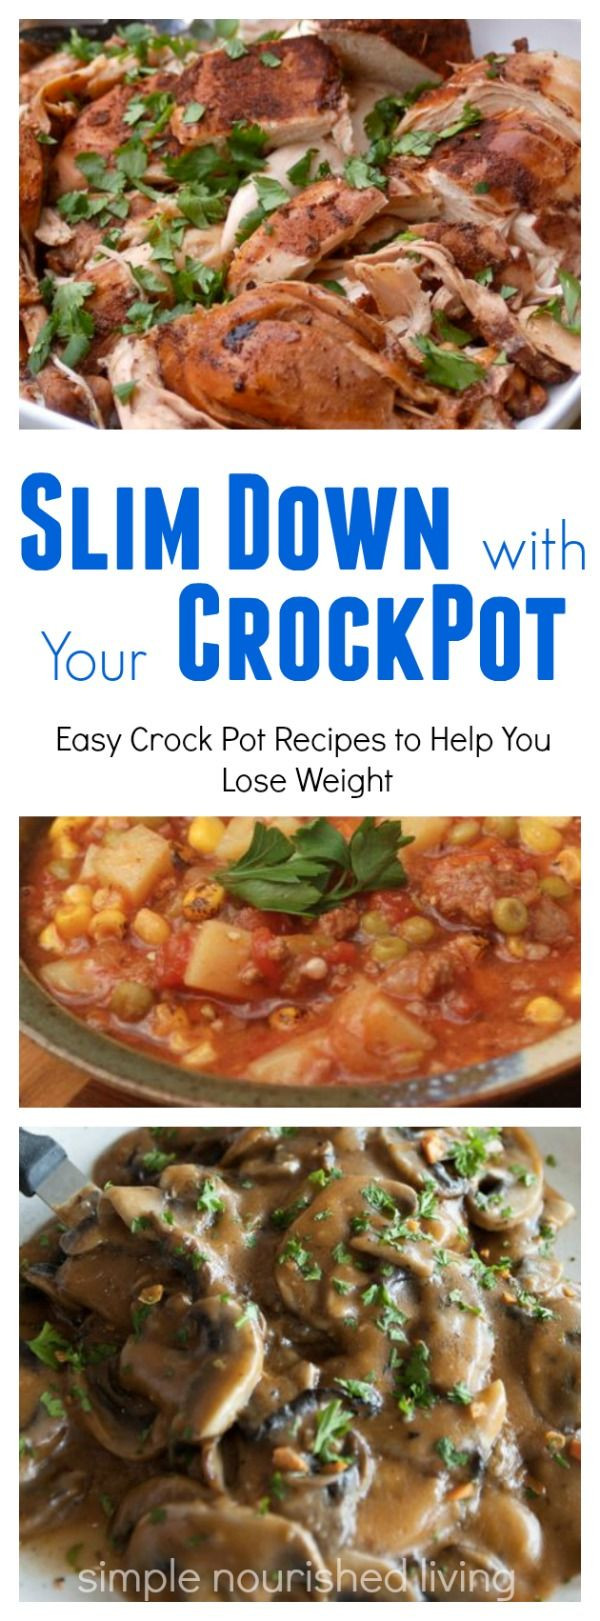 Healthy Low Calorie Crock Pot Recipes
 17 Best images about Weight Watchers Recipes with Smart